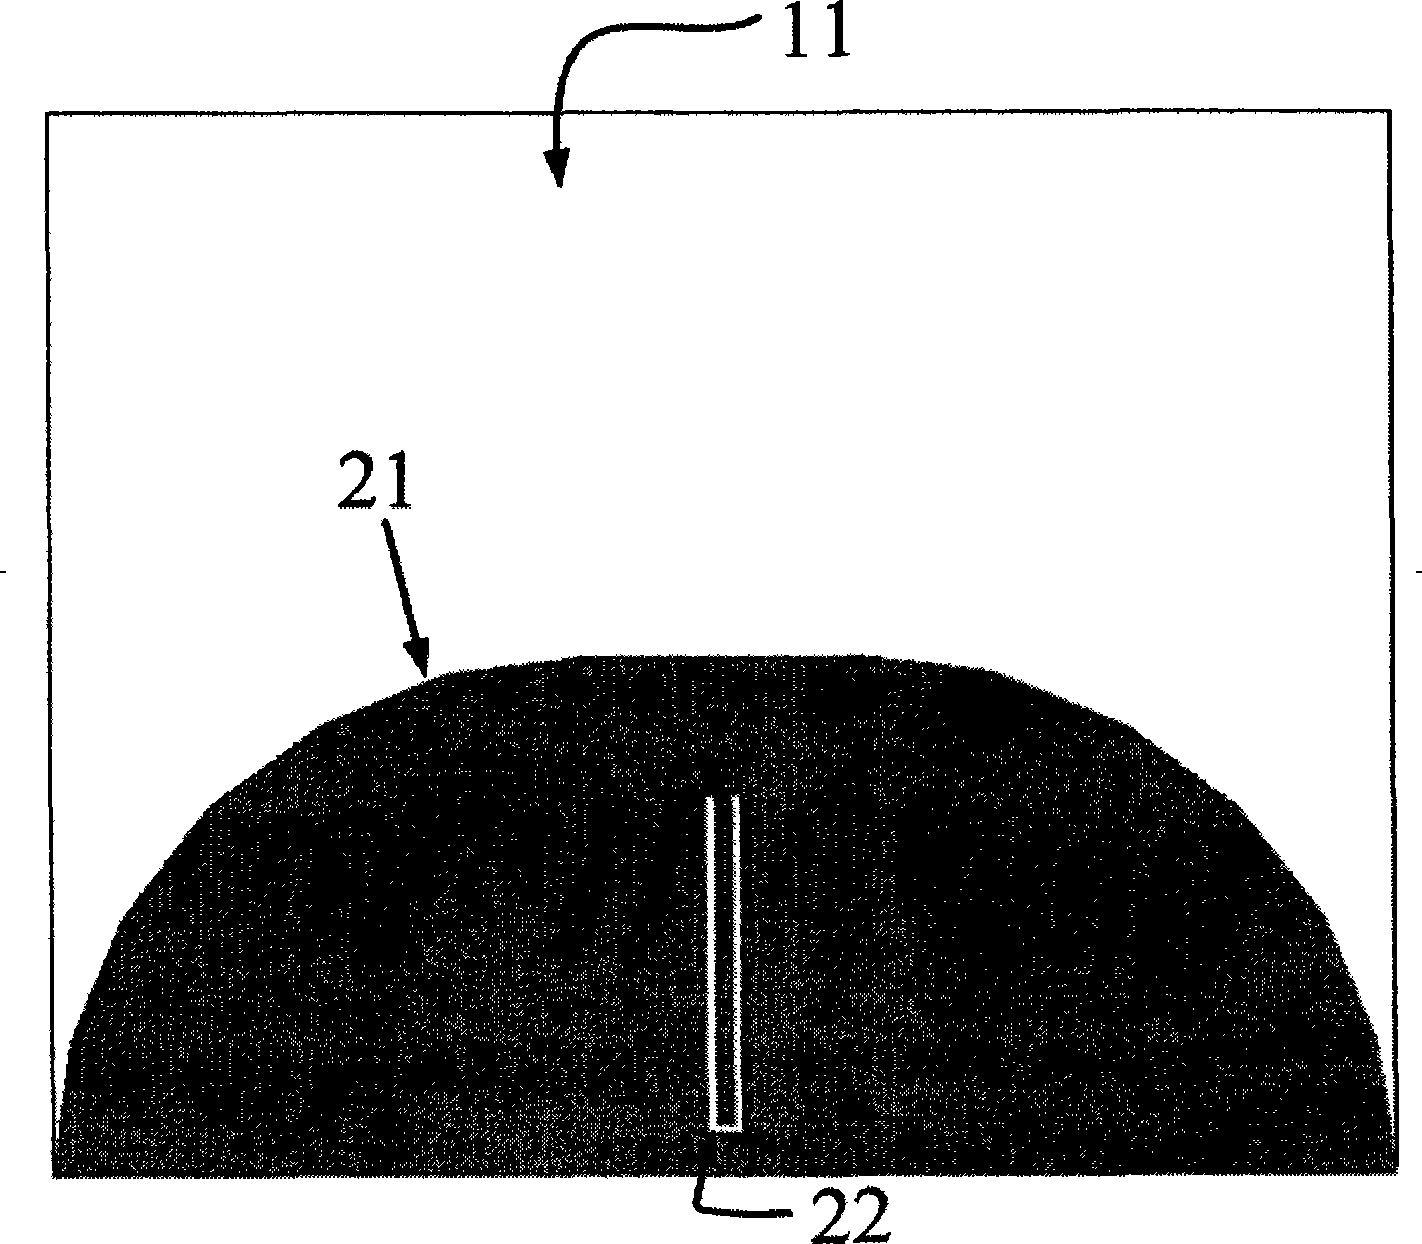 Miniaturized ultra-wideband antenna with dual-attenuation band function